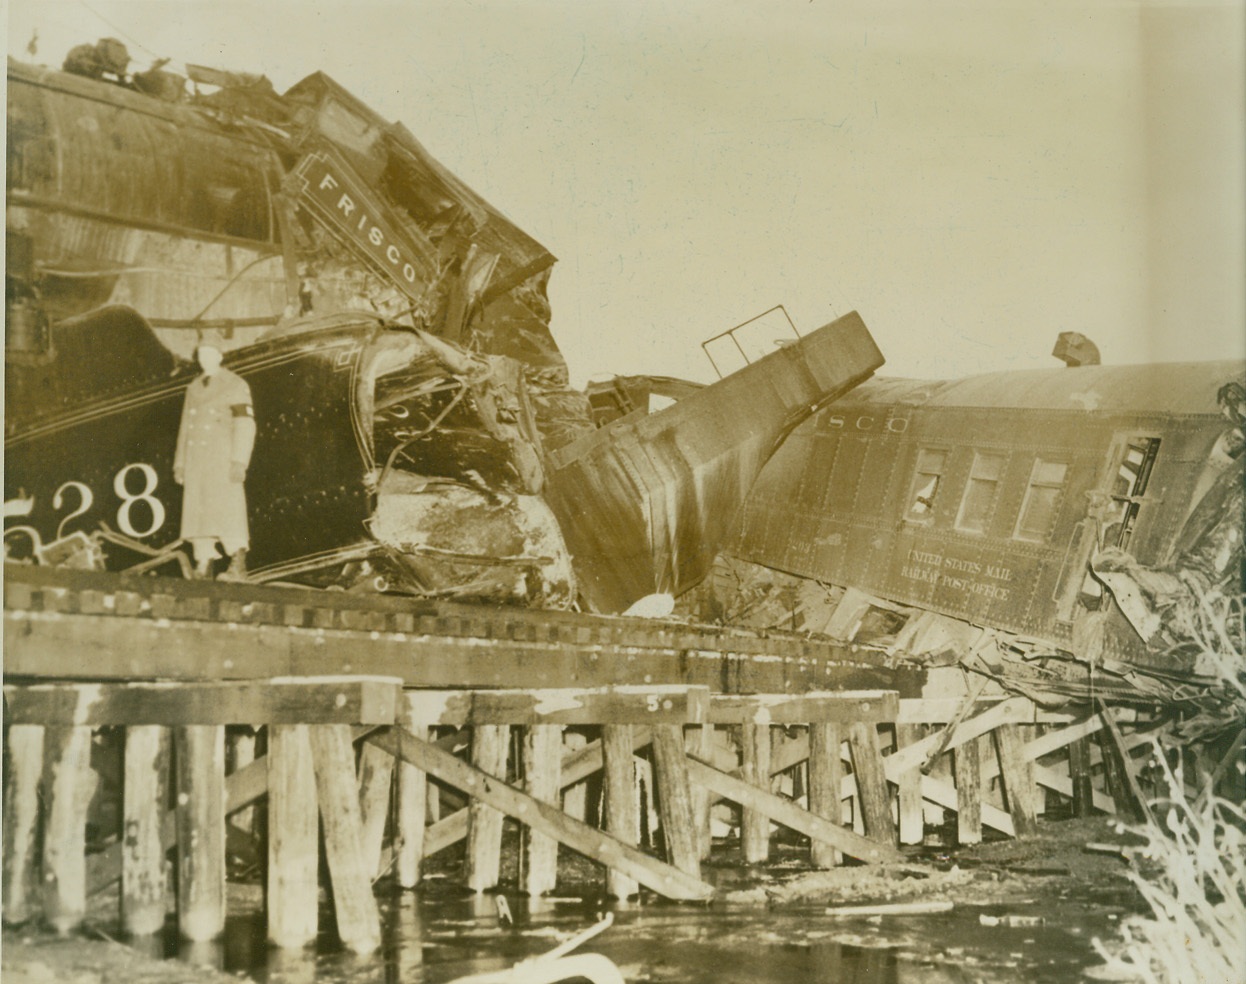 SPECIAL TRAIN CARRYING TROOPS IN HEAD-ON CRASH, 3/7/1942. GRANBY, MO. – Seven persons were killed and at least forty-five were injured when a special train carrying troops and a fast Frisco passenger train, the Will Rogers, collided head-on in the middle of a trestle at Granby. Four of the dead were soldiers who were among 230 recruits enroute from Camp Grant, Ill. The other three were crew members on the Will Rogers. Railroad officials said a mix-up in signals was responsible for the head-on collision. Passed by Army censor. Credit: ACME;